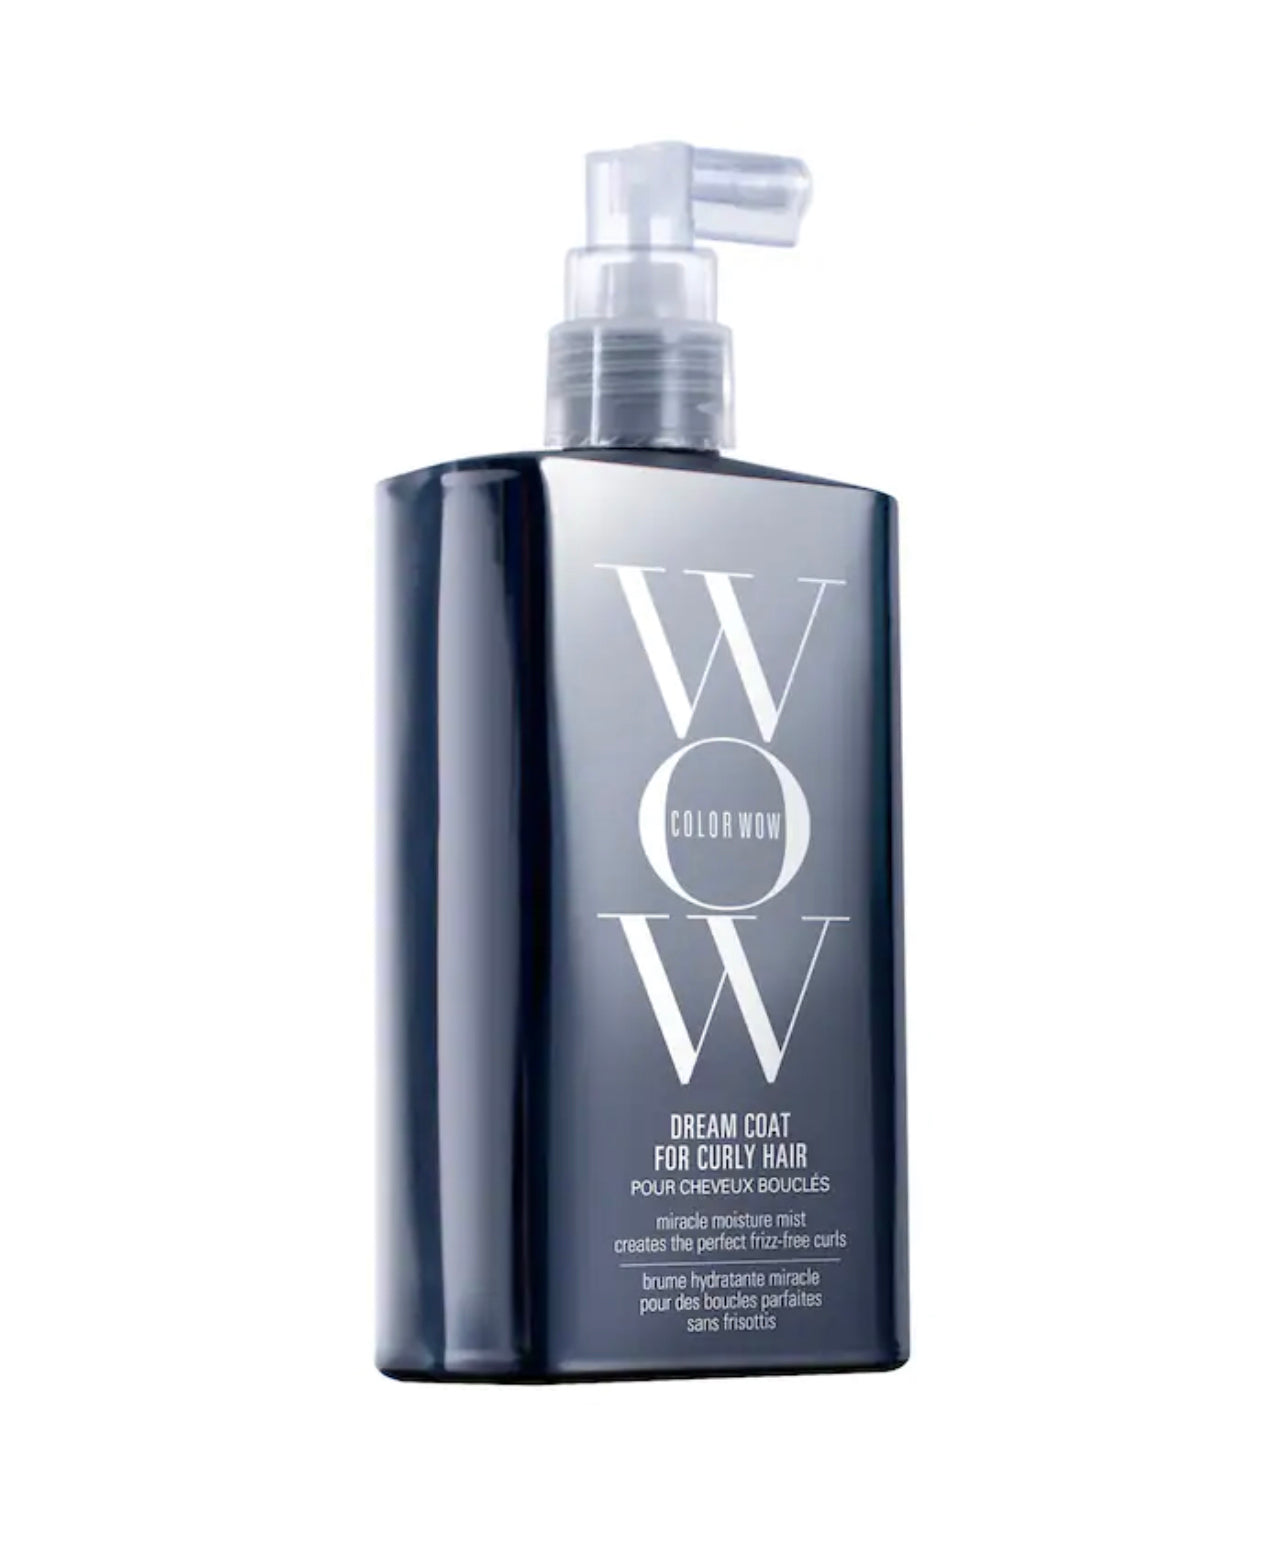 COLOR WOW DREAM COAT ANTI-FRIZZ TREATMENT FOR CURLY HAIR